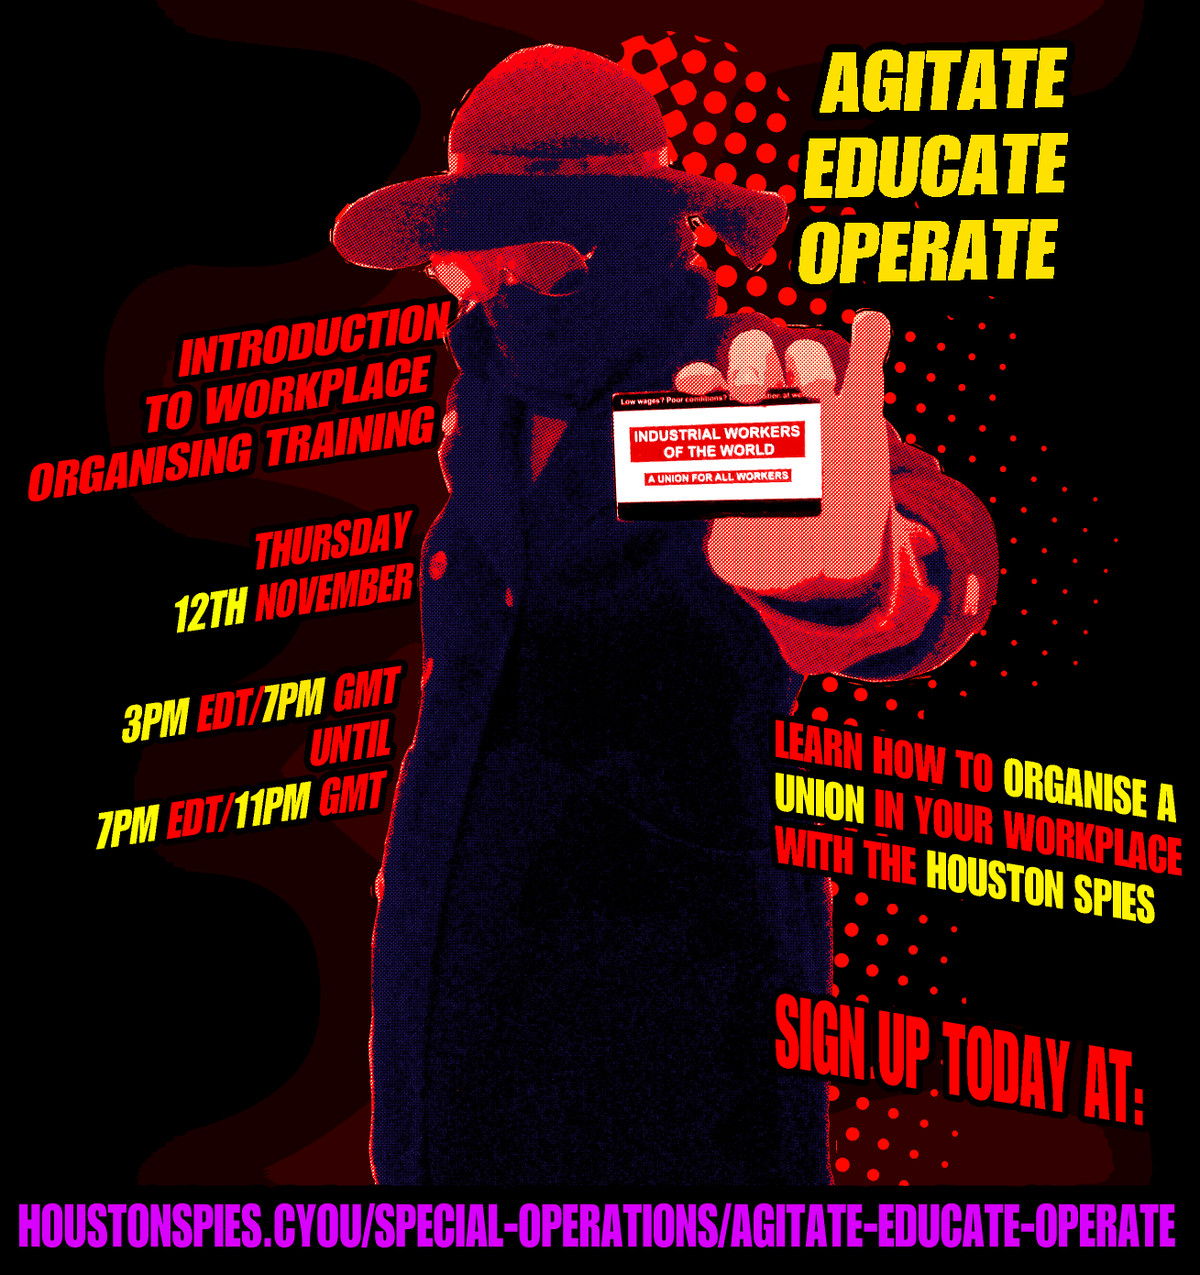 A Spies Organise recruitment poster, which shows a member of the Industrial Workers of the Worlds in mysterious garb showing off a business card. they are surrounded by information about an upcoming training seminar.